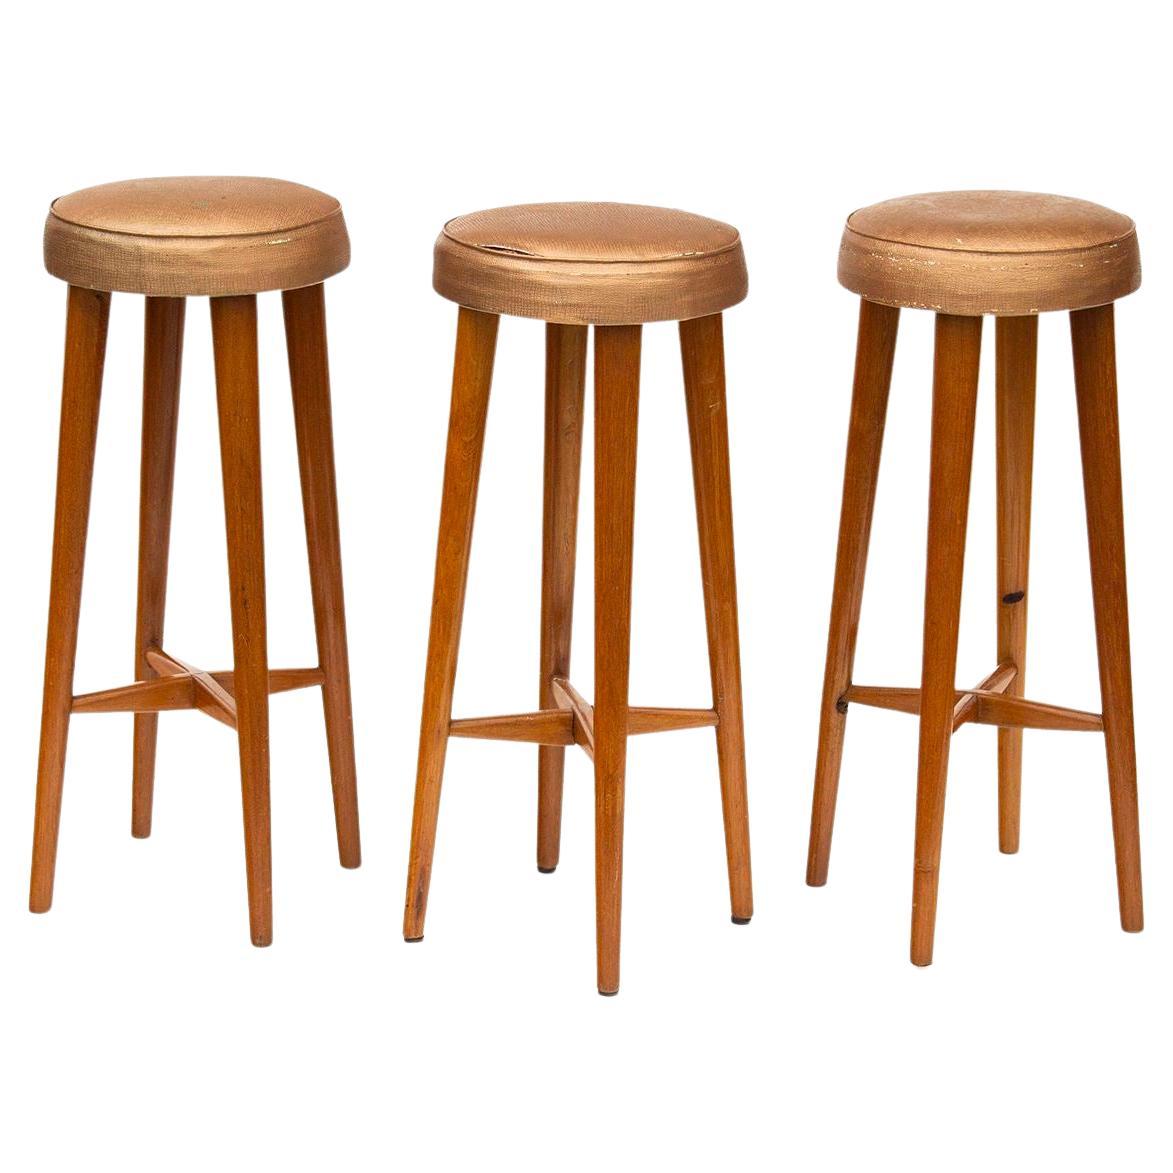 Handmade Oak Barstools with 31" H, S/3 For Sale